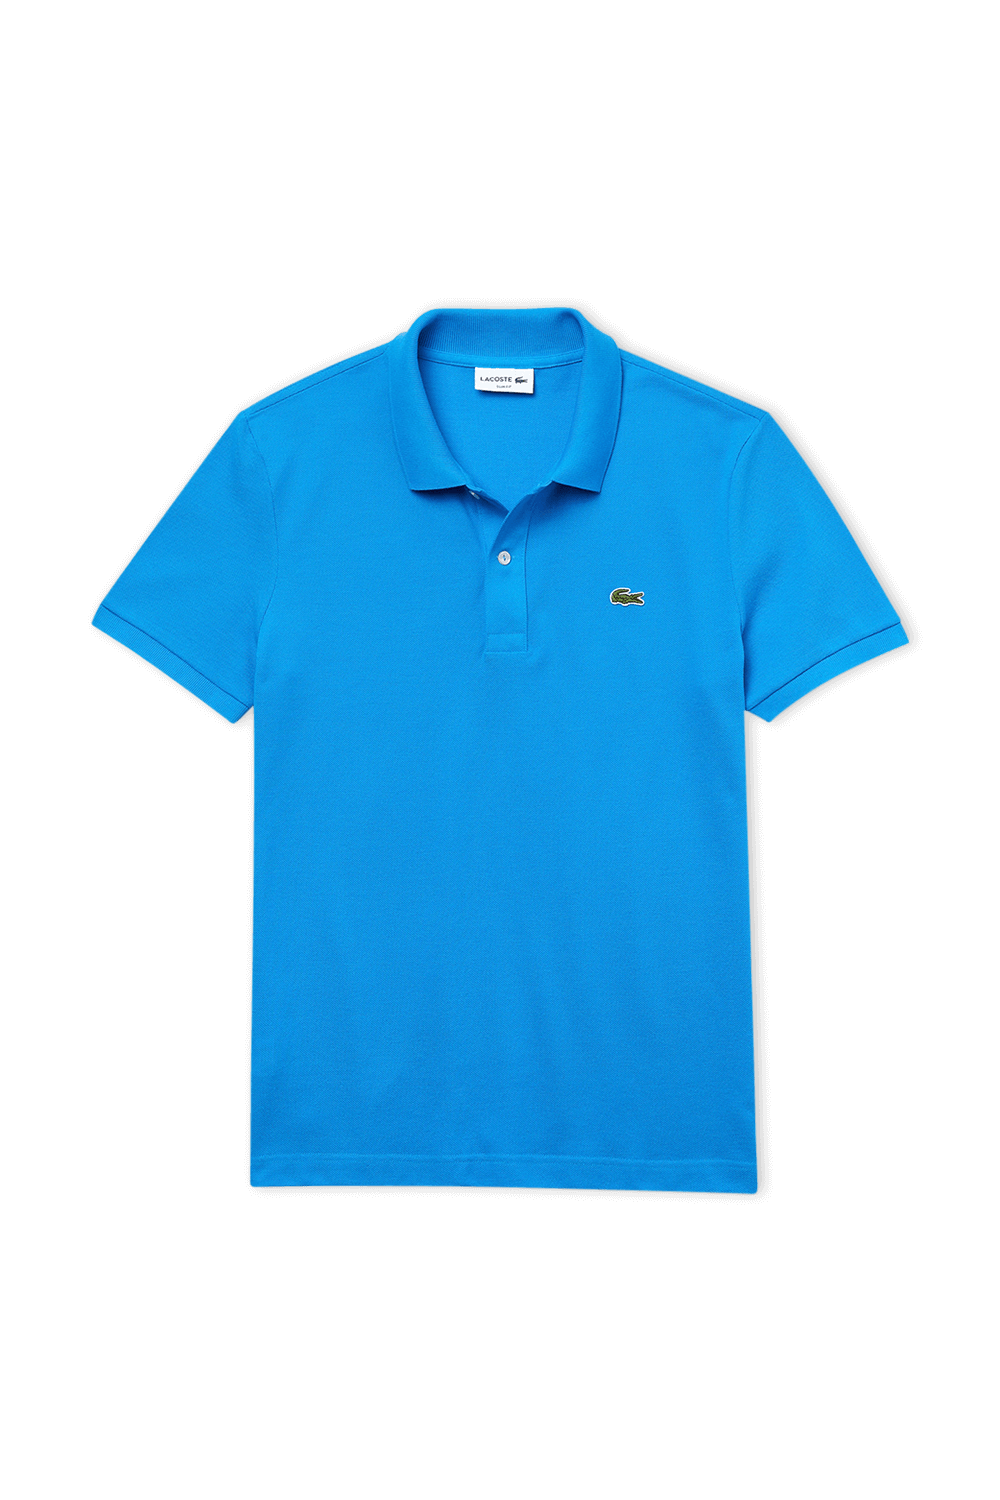 Slim Fit Polo Shirt in Blue LACOSTE